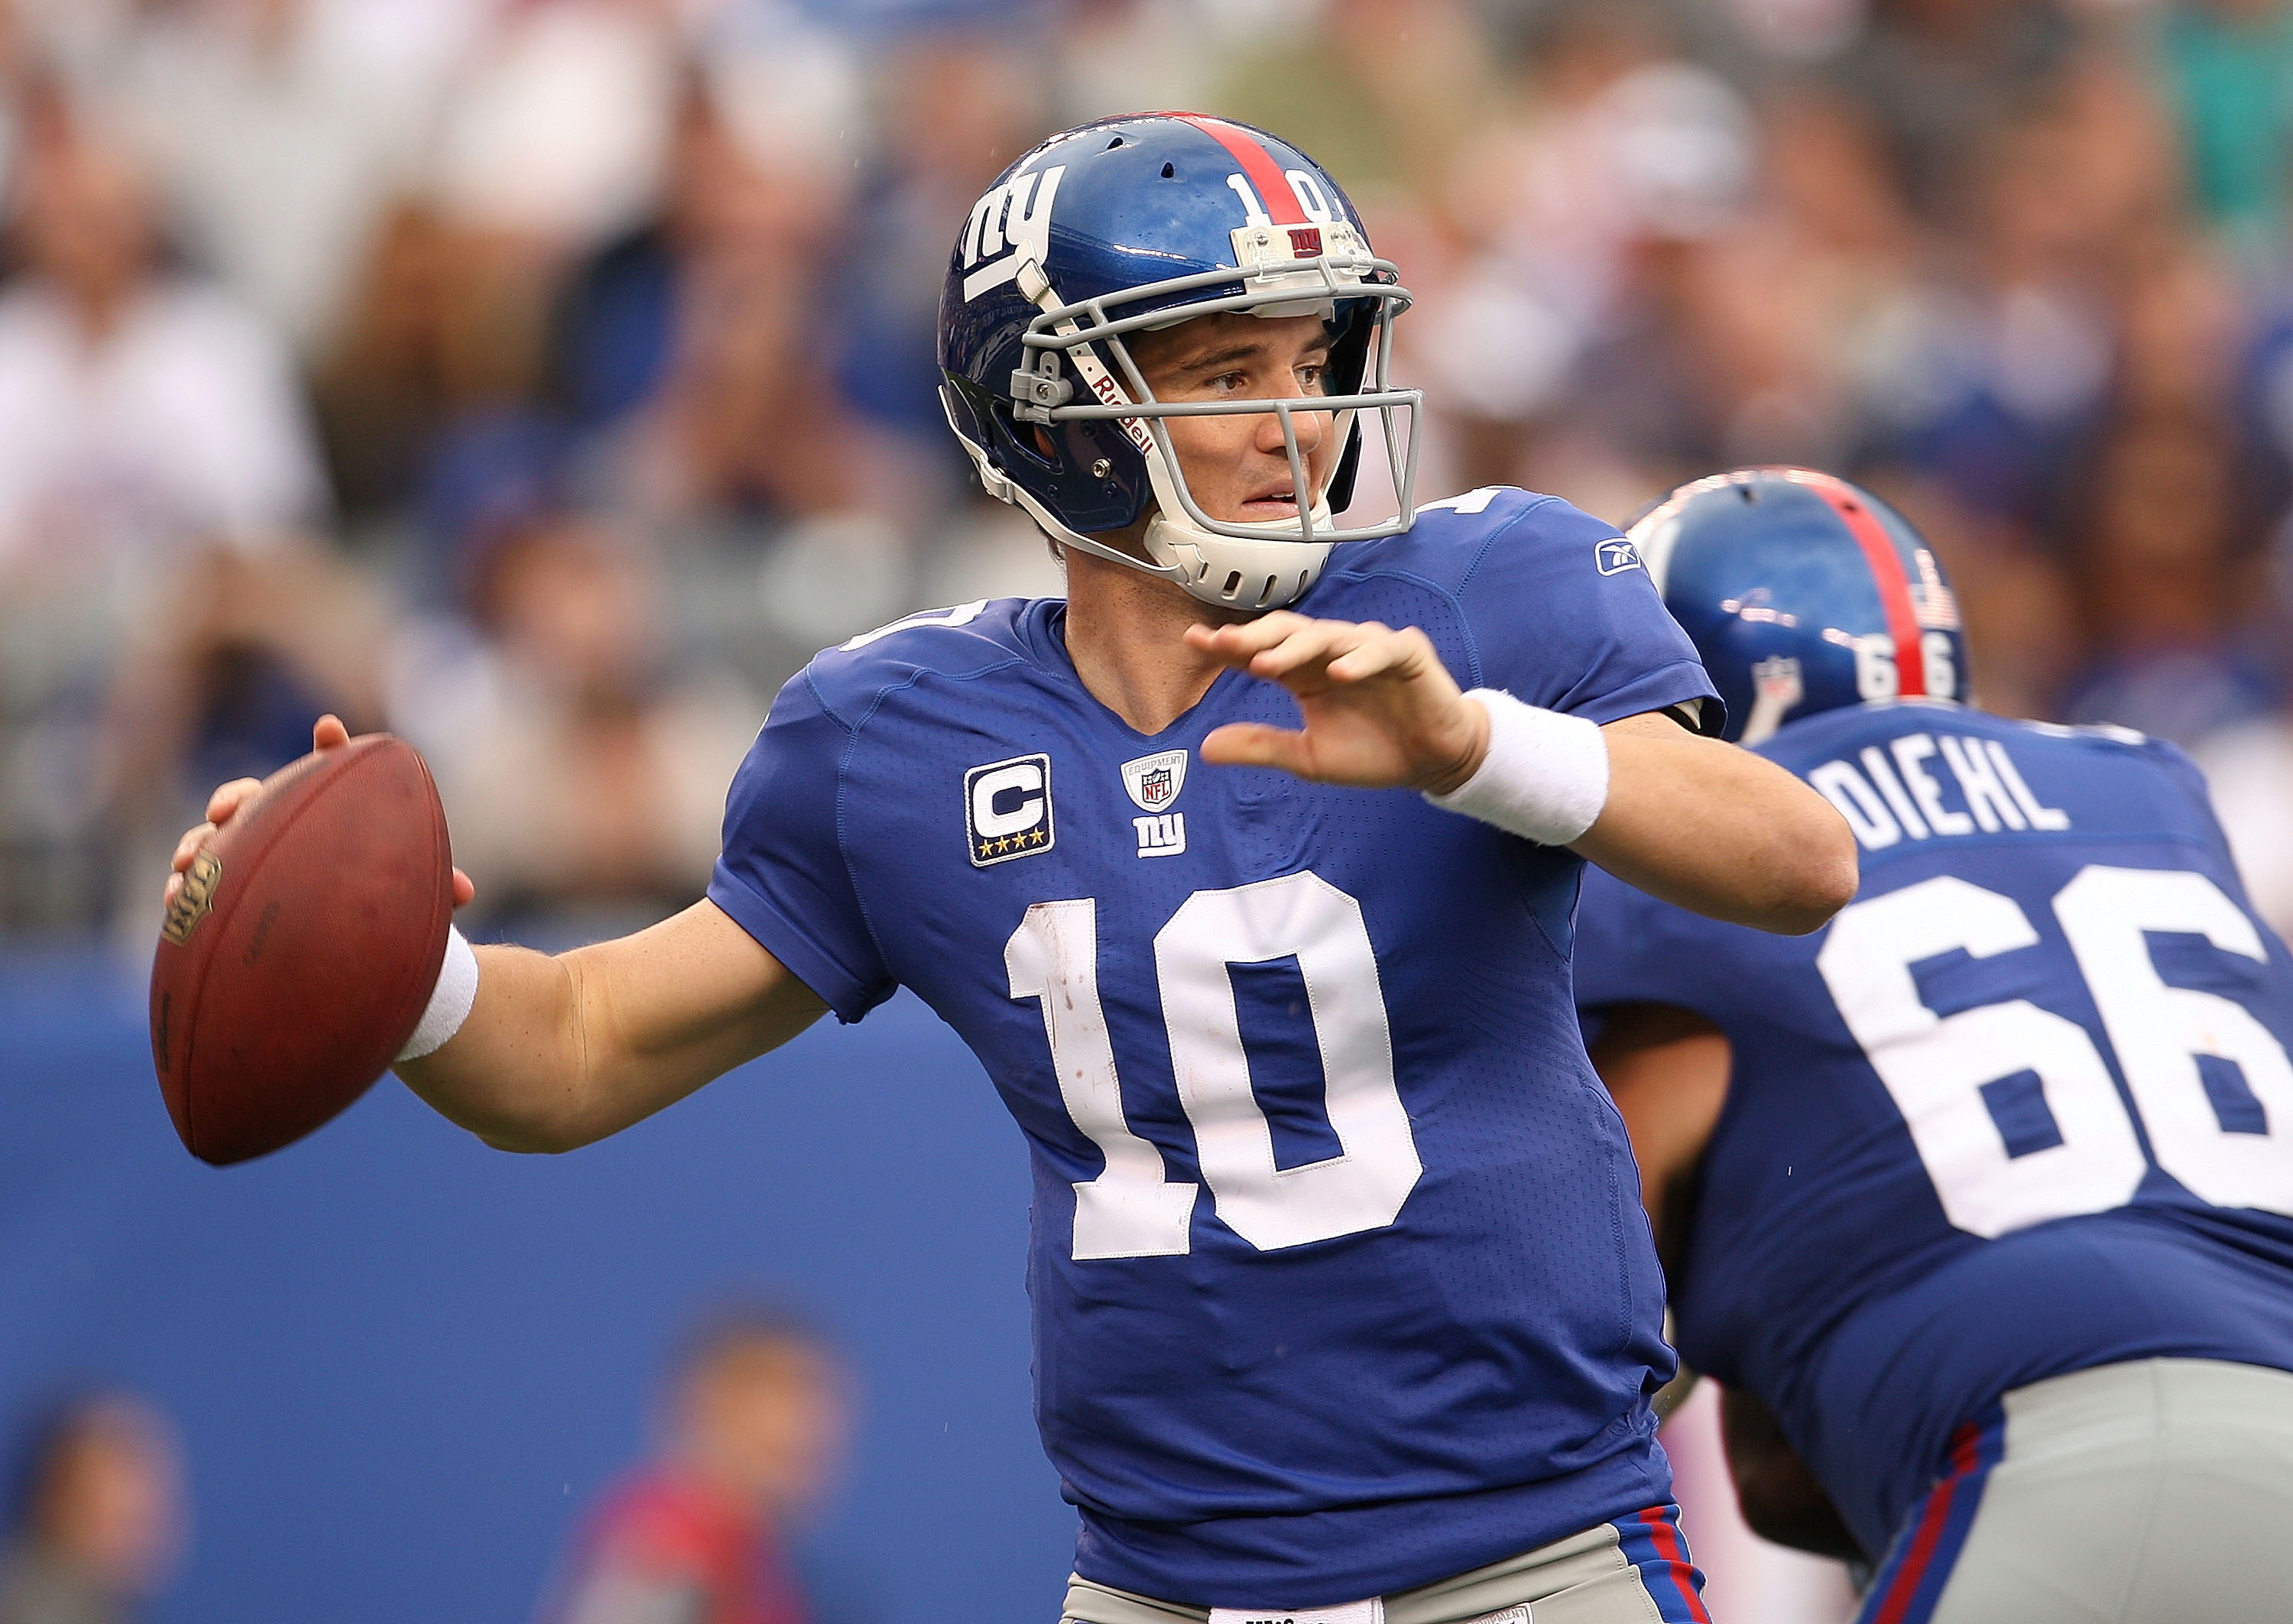 EAST RUTHERFORD, NJ - SEPTEMBER 26:  Eli Manning #10 of the New York Giants passes during a game against the Tennessee Titans at New Meadowlands Stadium on September 26, 2010 in East Rutherford, New Jersey.  (Photo by Mike Ehrmann/Getty Images)